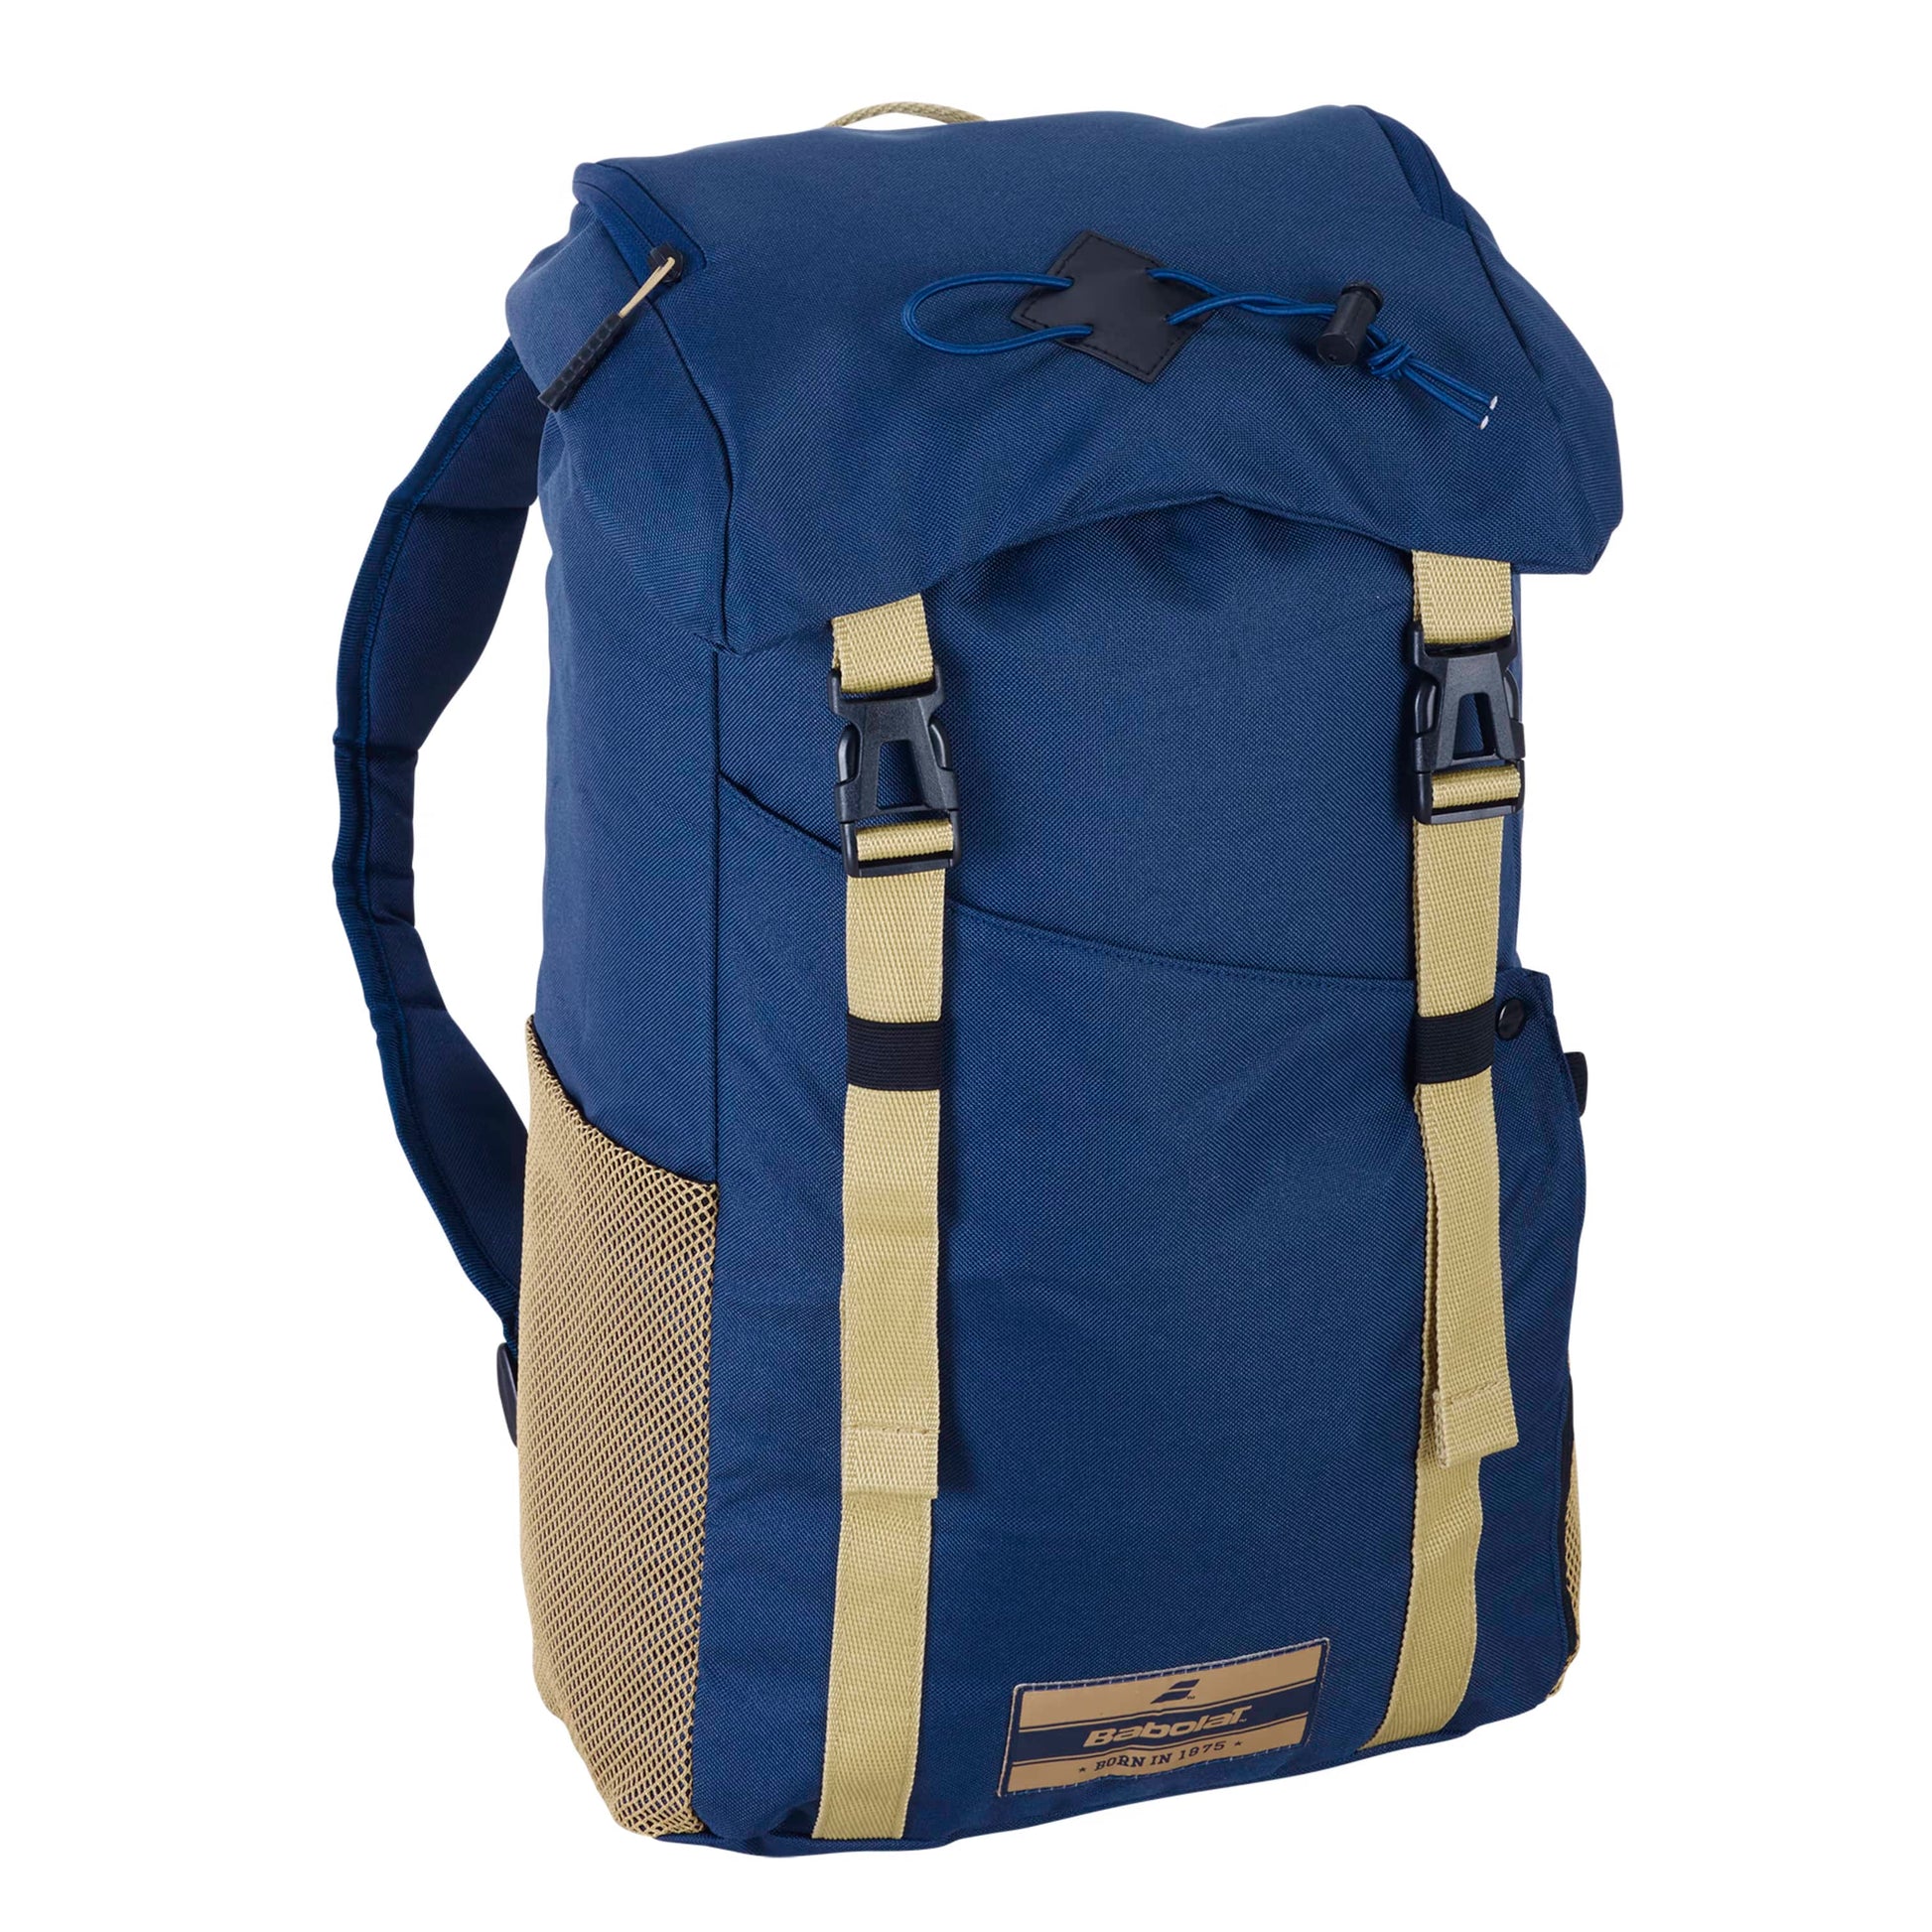 Babolat Classic Backpack Navy Blue - Right